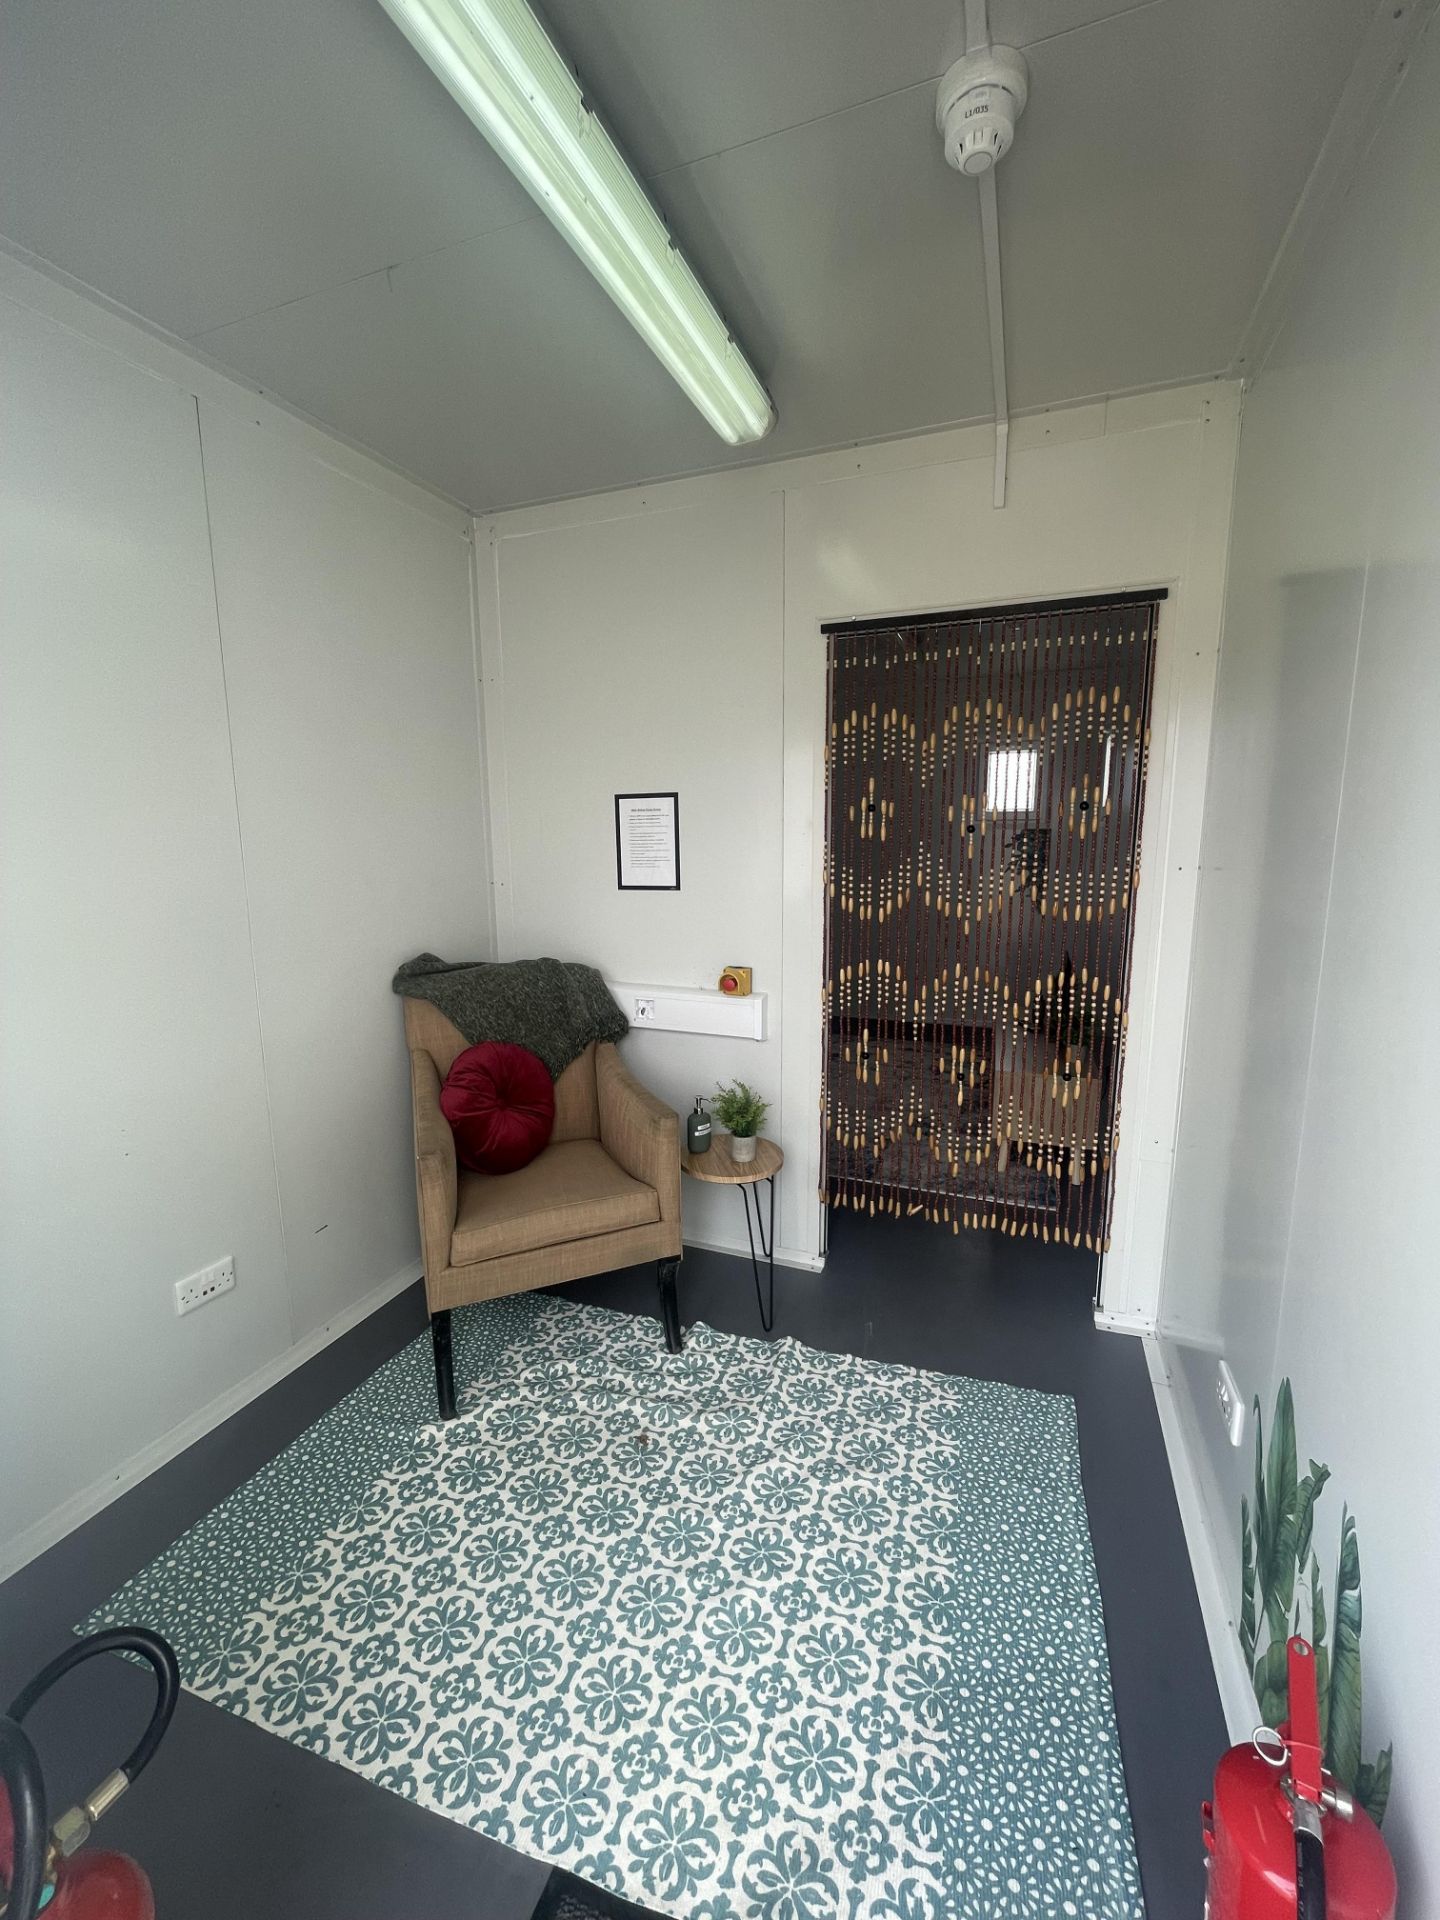 Wellbeing cabin with furniture contents